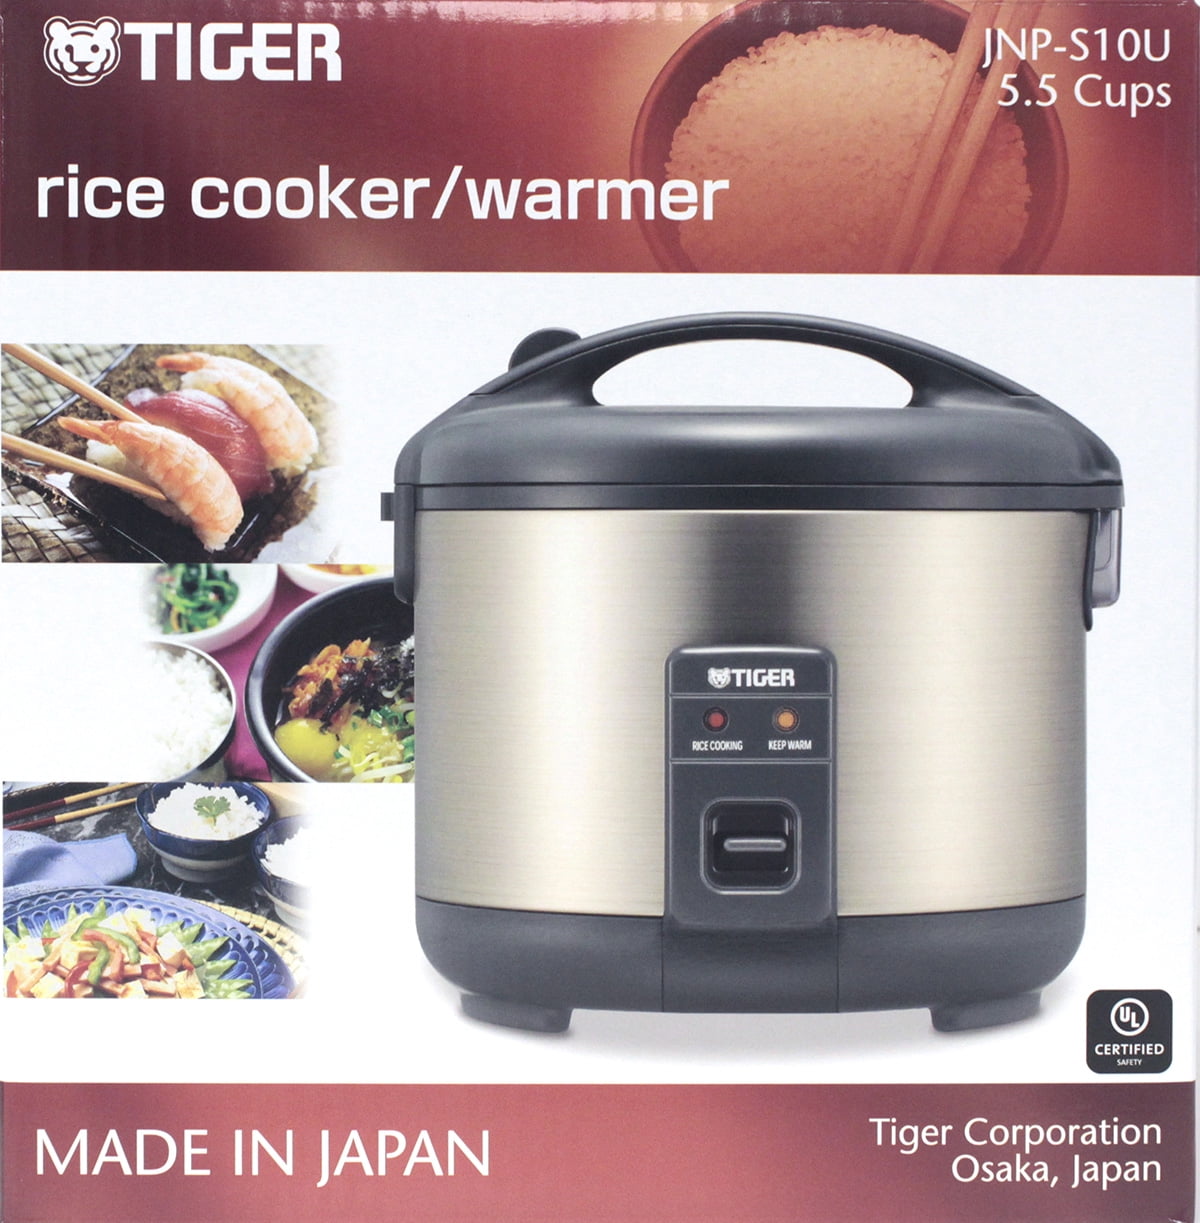  CookMax 5 Cup Rice Cooker (2-10 cups of cooked rice